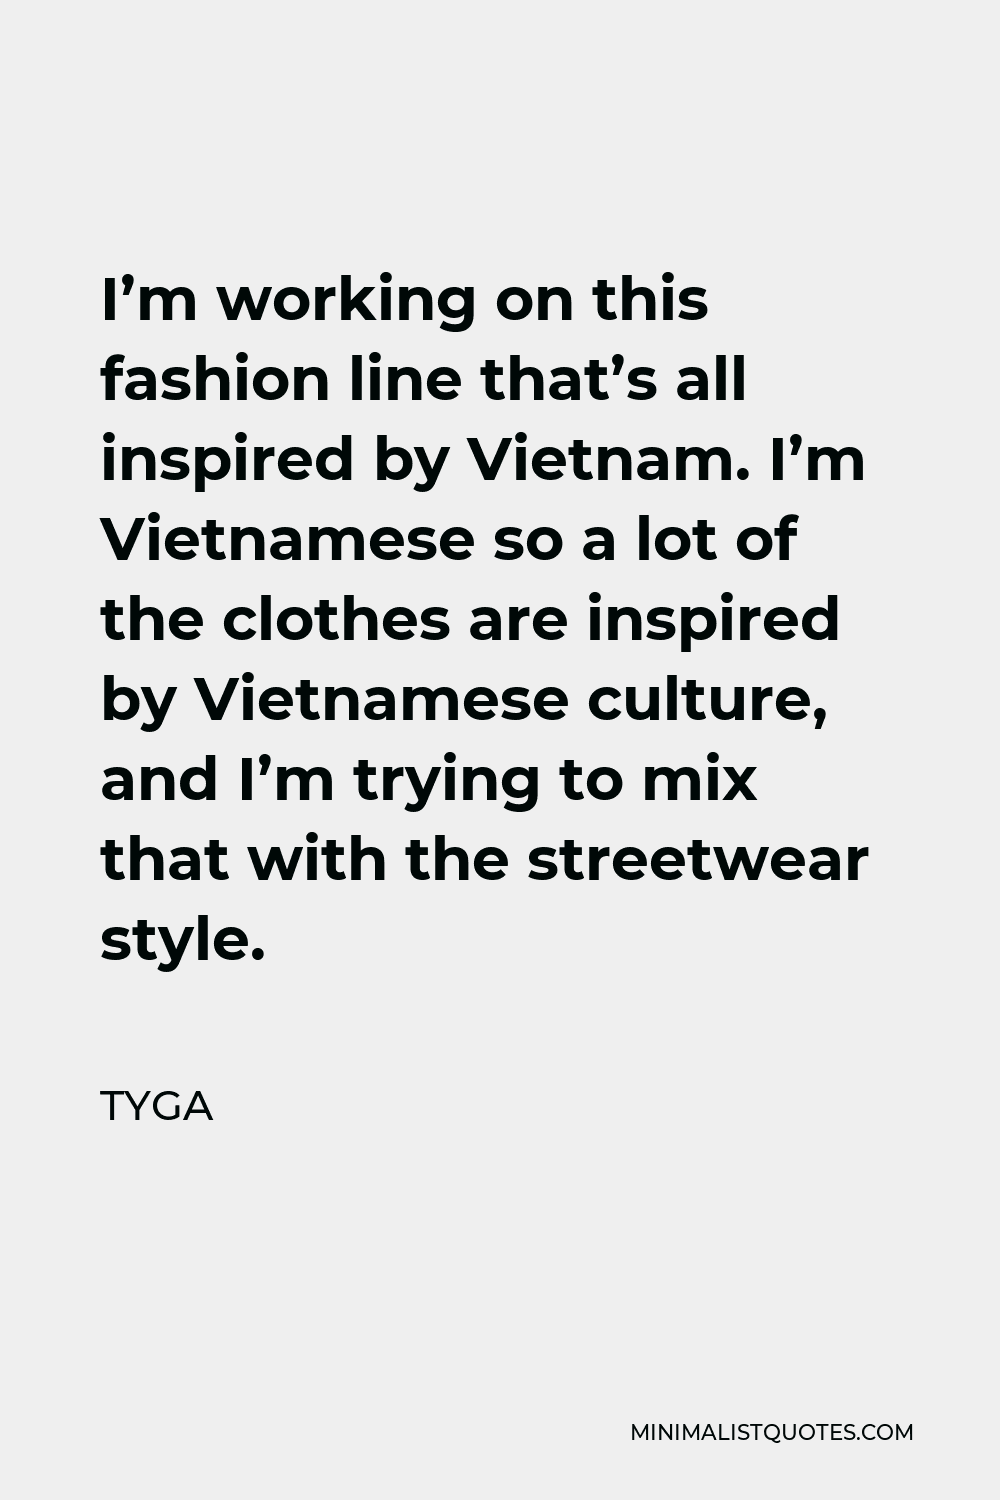 Tyga Quote - I’m working on this fashion line that’s all inspired by Vietnam. I’m Vietnamese so a lot of the clothes are inspired by Vietnamese culture, and I’m trying to mix that with the streetwear style.